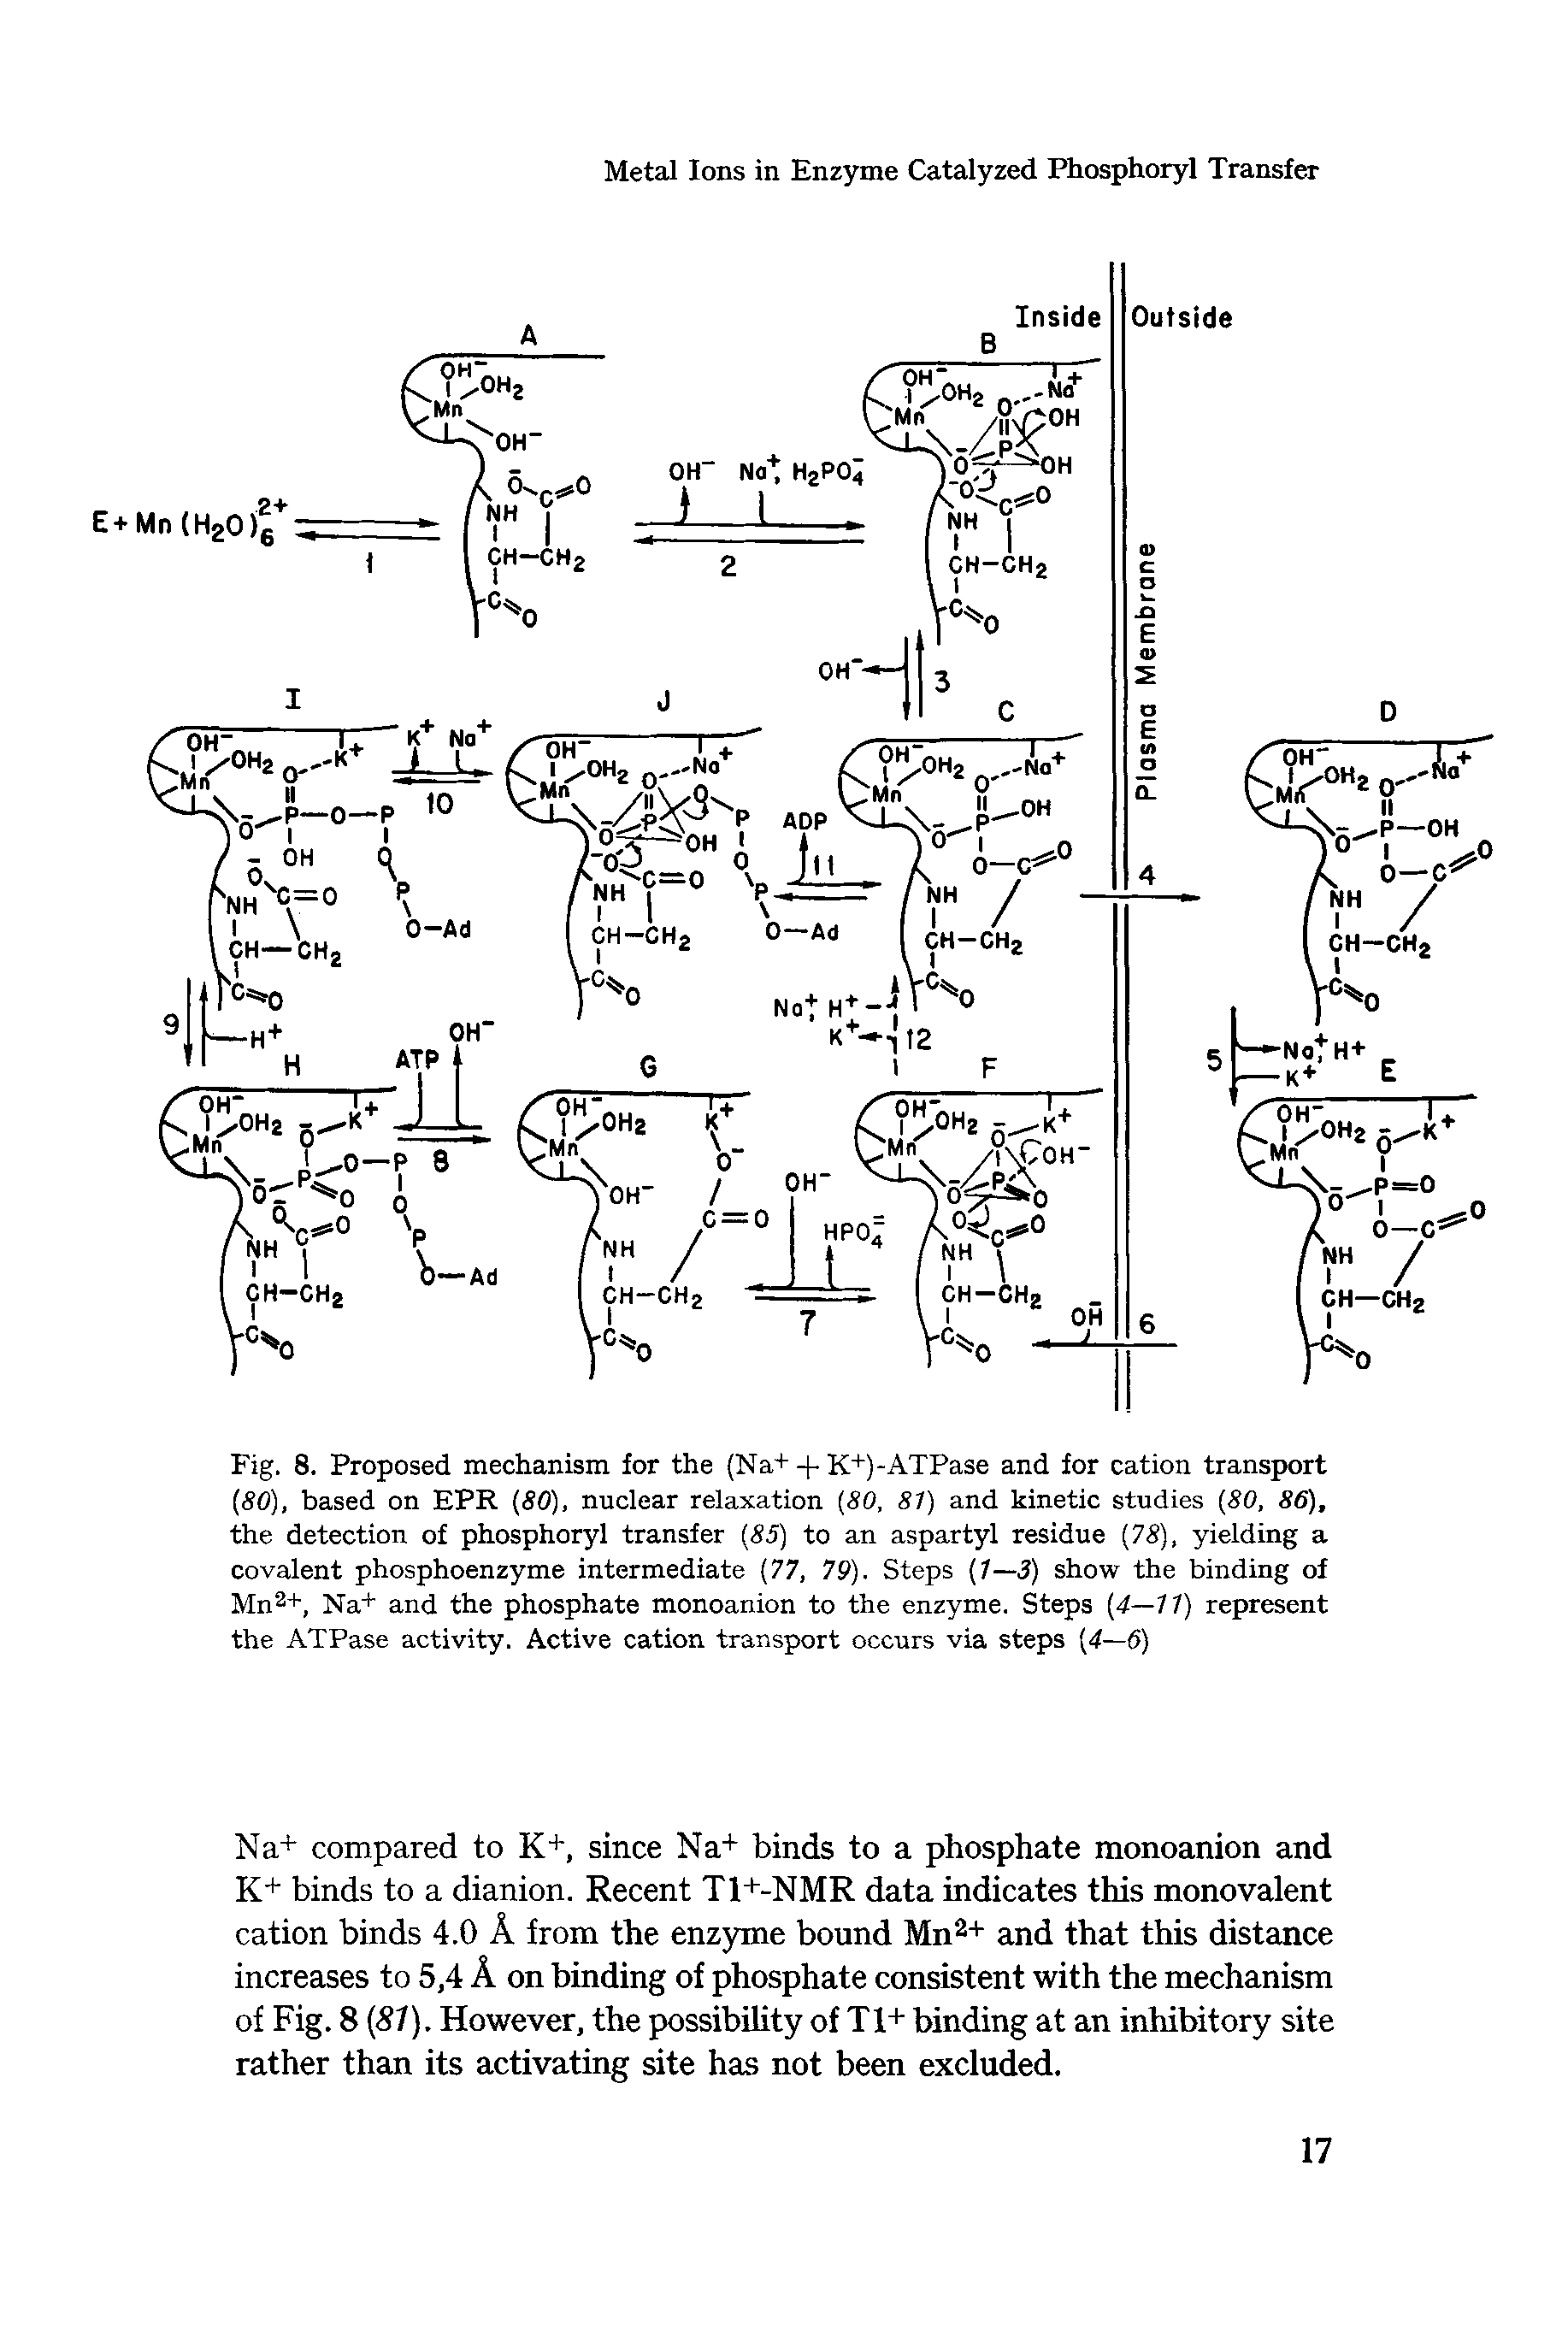 Fig. 8. Proposed mechanism for the (Na+ + K+)-ATPase and for cation transport (80), based on EPR (80), nuclear relaxation (80, 81) and kinetic studies (80, 86), the detection of phosphoryl transfer (85) to an aspartyl residue (78), yielding a covalent phosphoenzyme intermediate (77, 79). Steps (1—3) show the binding of Mna+, Na+ and the phosphate monoanion to the enzyme. Steps (4—11) represent the ATPase activity. Active cation transport occurs via steps (4—6)...